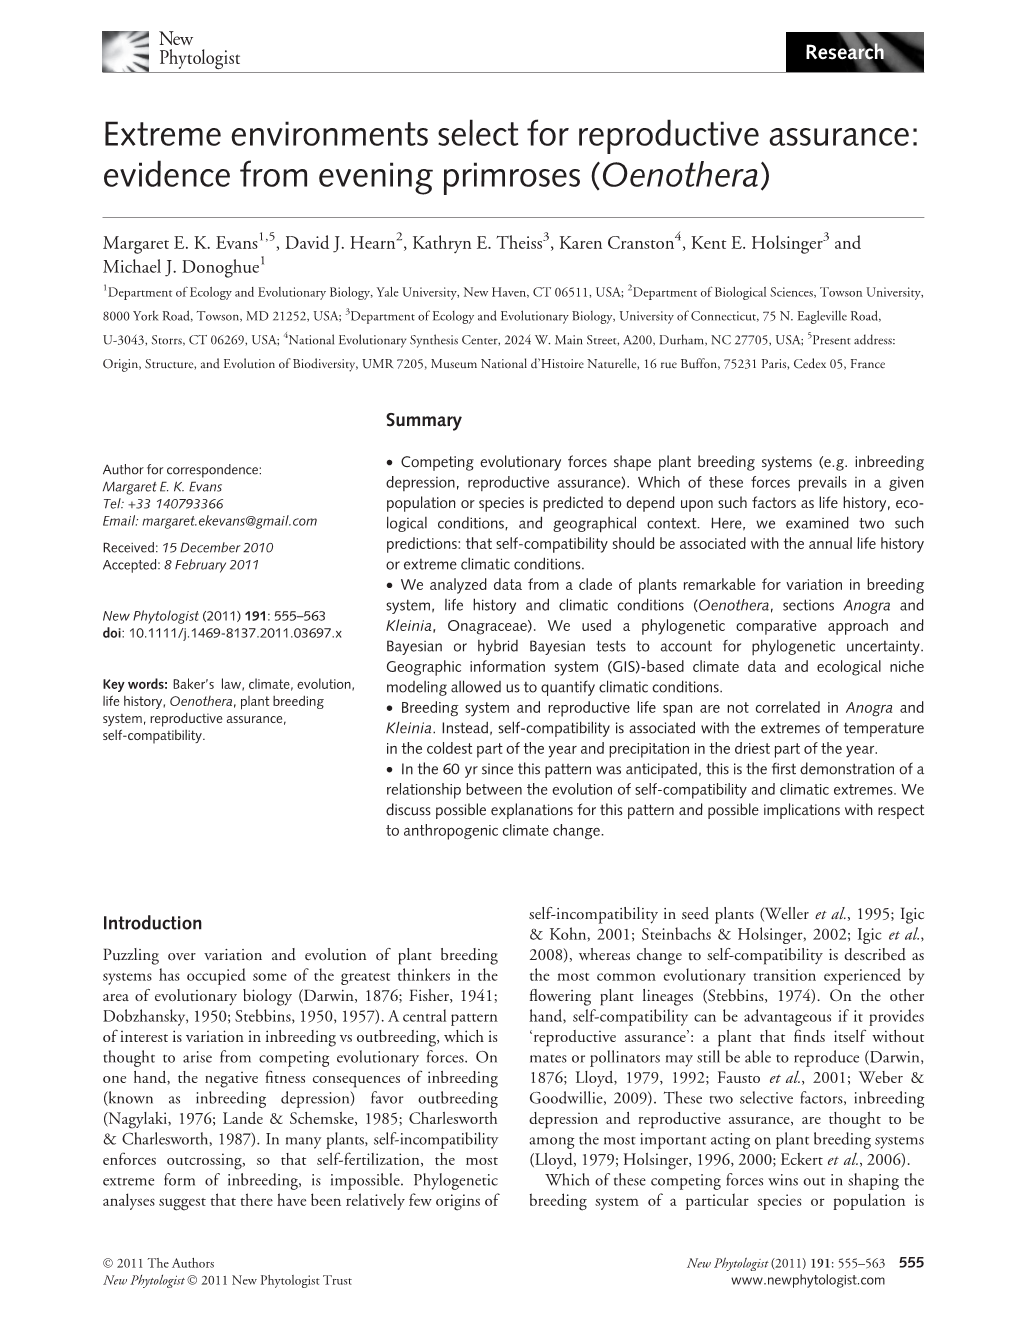 Extreme Environments Select for Reproductive Assurance: Evidence from Evening Primroses (Oenothera)